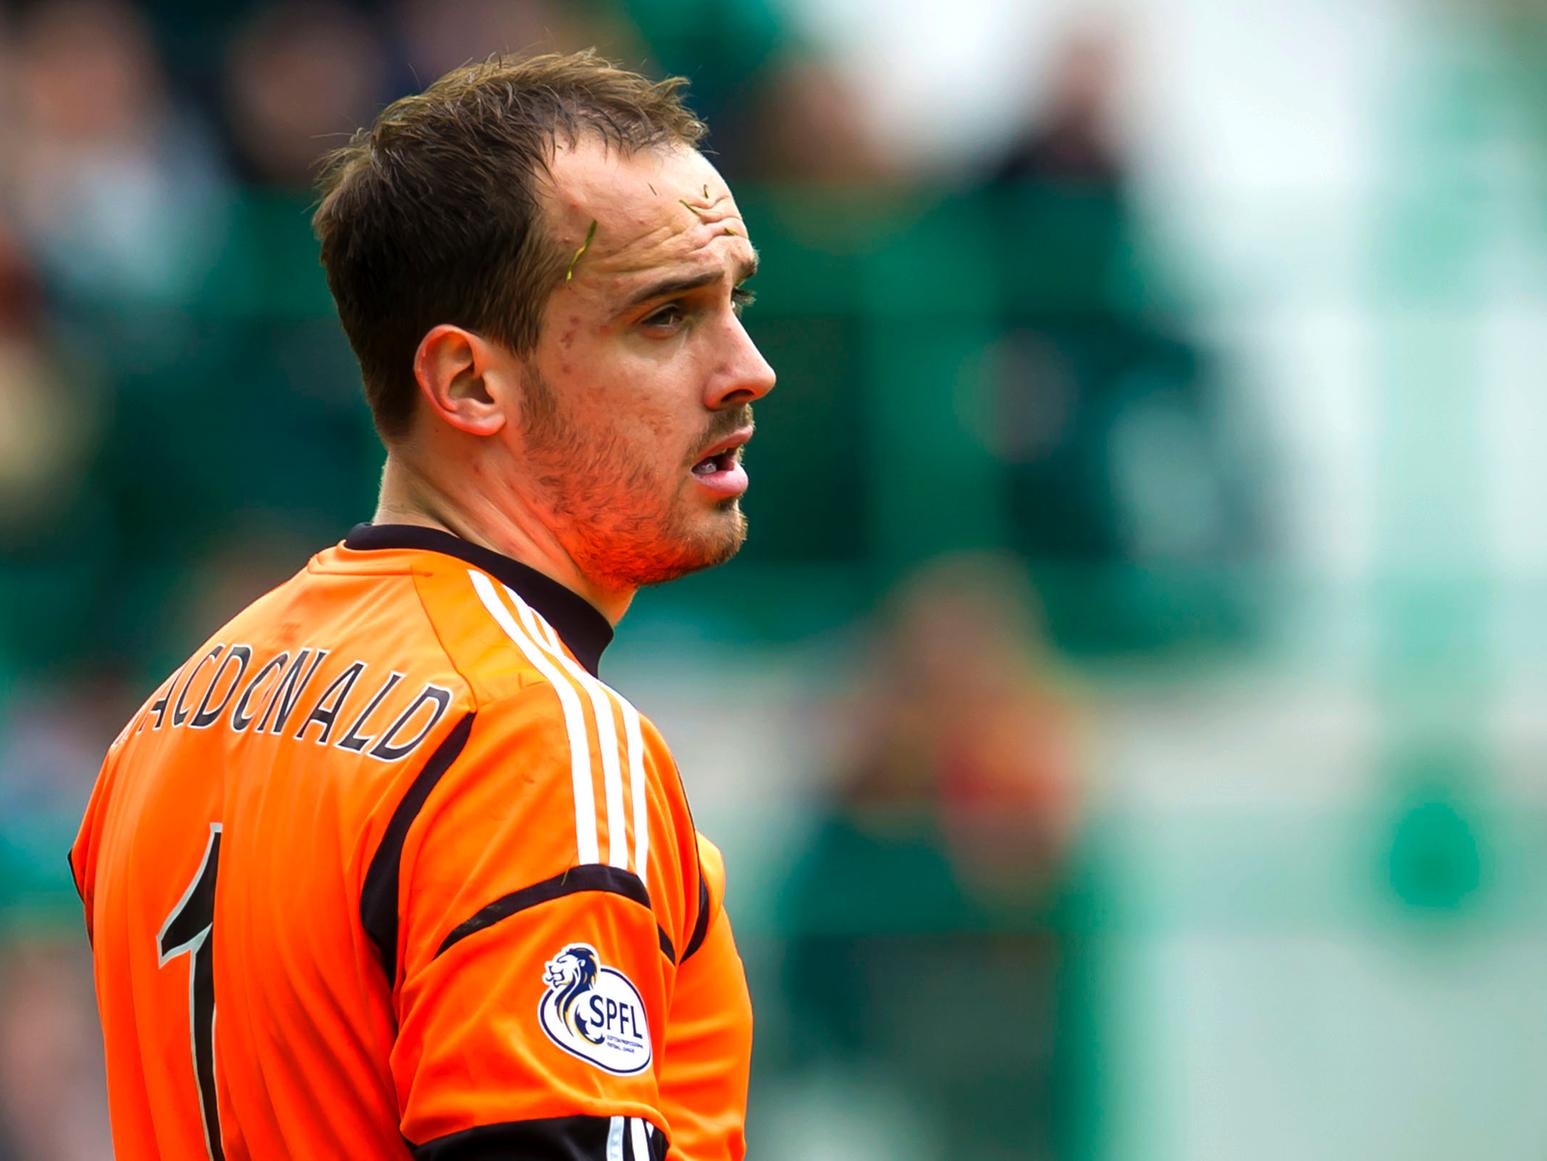 Where is he now? The goalkeeper is on loan at Alloa Athletic after dropping down to third in the pecking order at Kilmarnock.